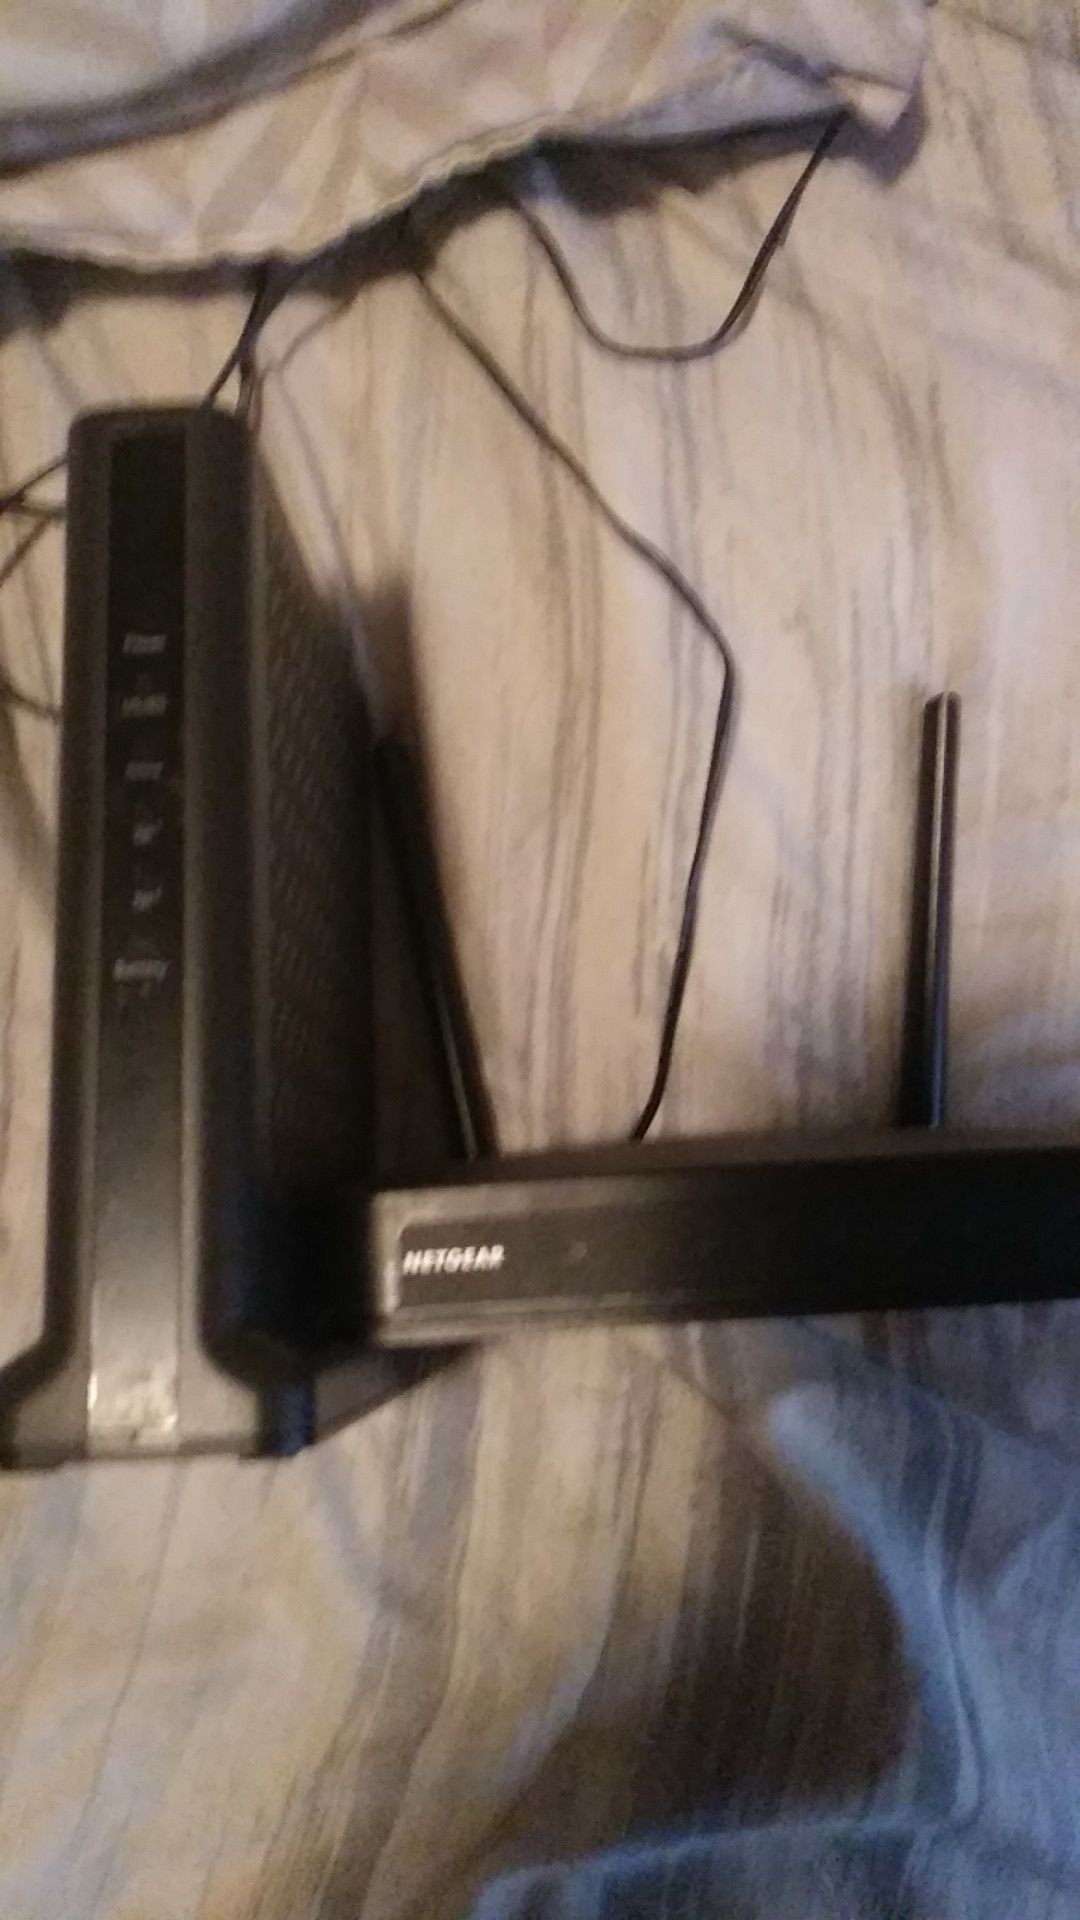 Modem and night hawk router